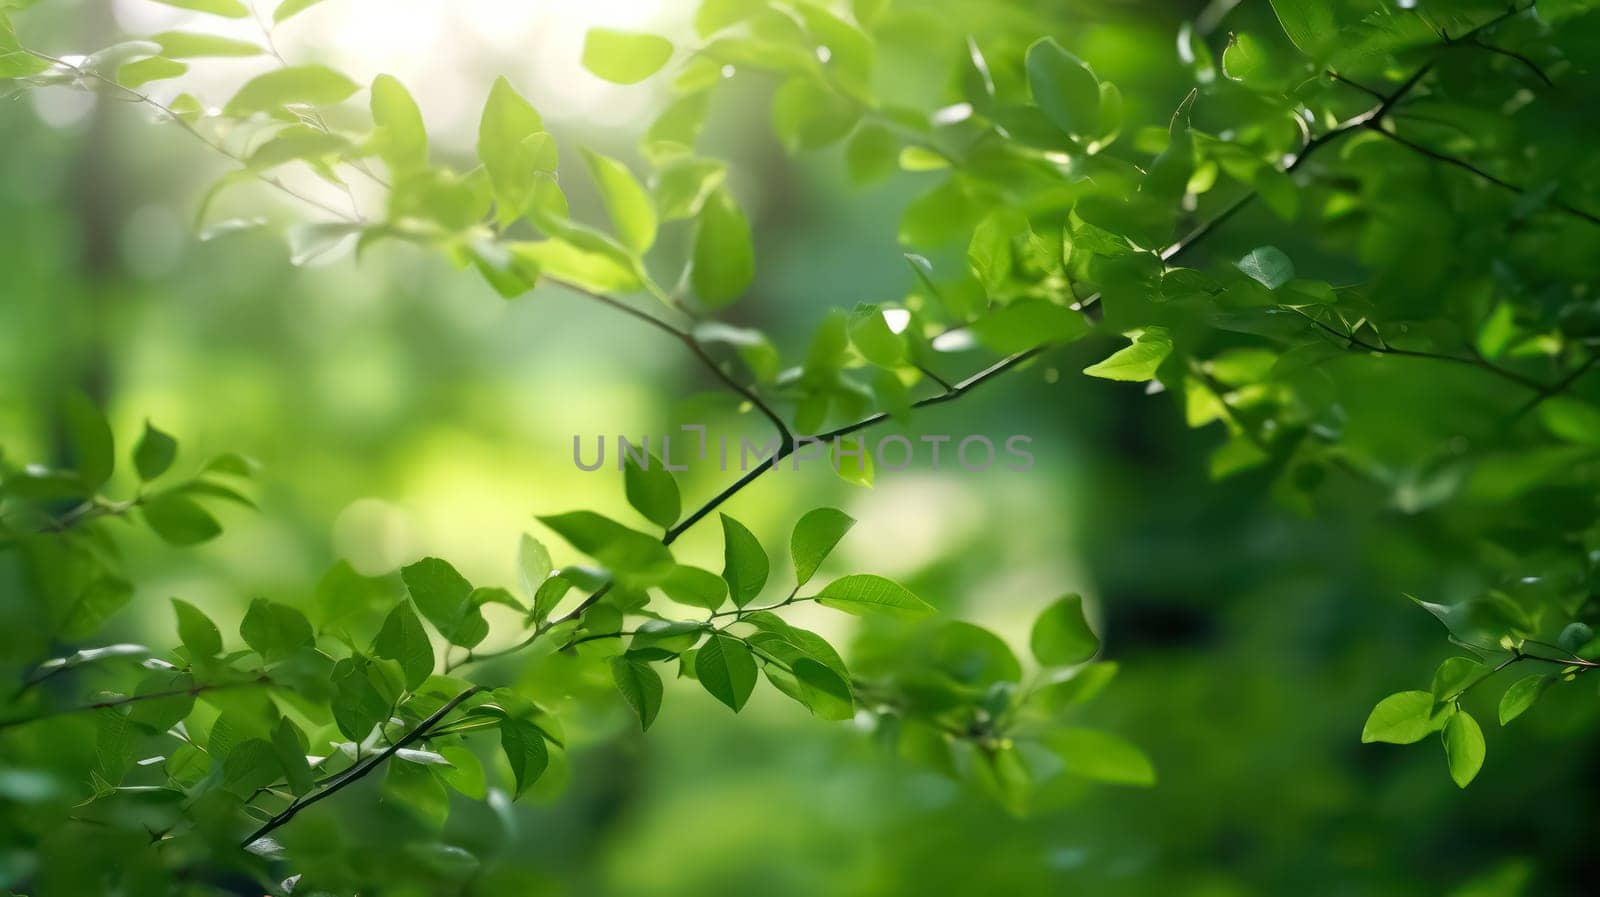 Lush green beech tree leaves thrive in the forest on a sunny day, presenting a serene image against a softly blurred natural background.